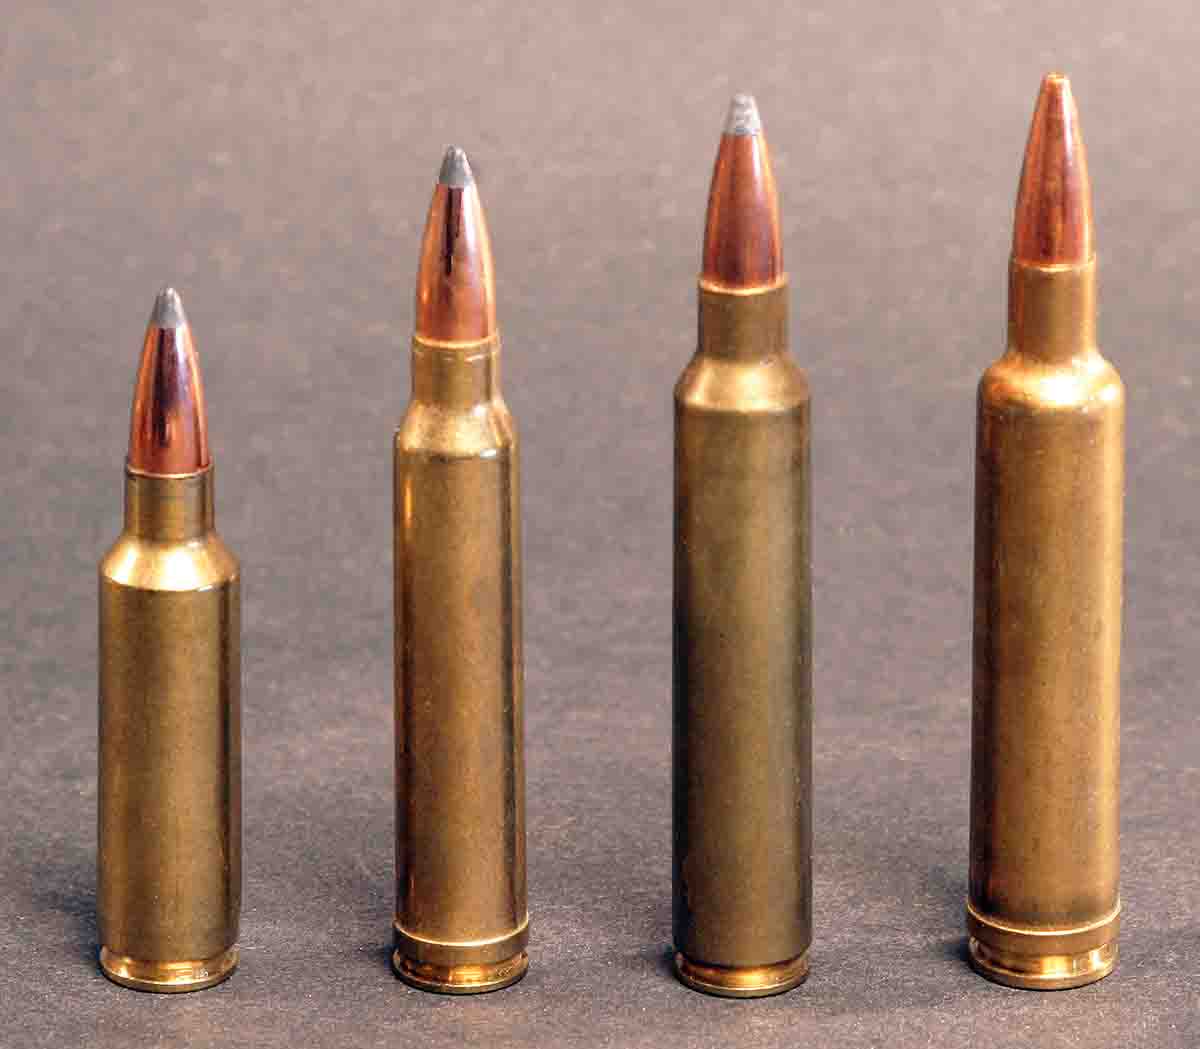 Thirty-caliber cartridges have often been crowded into bolt-action magazines, one reason some .30-caliber spitzers have relatively blunt ogives. They don’t have to be seated as deeply, allowing more room for powder. This results in a little more muzzle velocity but reduces downrange velocity. Cartridges include (left to right): the .300 Winchester Short Magnum, .300 Winchester Magnum, .300 Remington Ultra Mag and the .30-378 Weatherby Magnum.